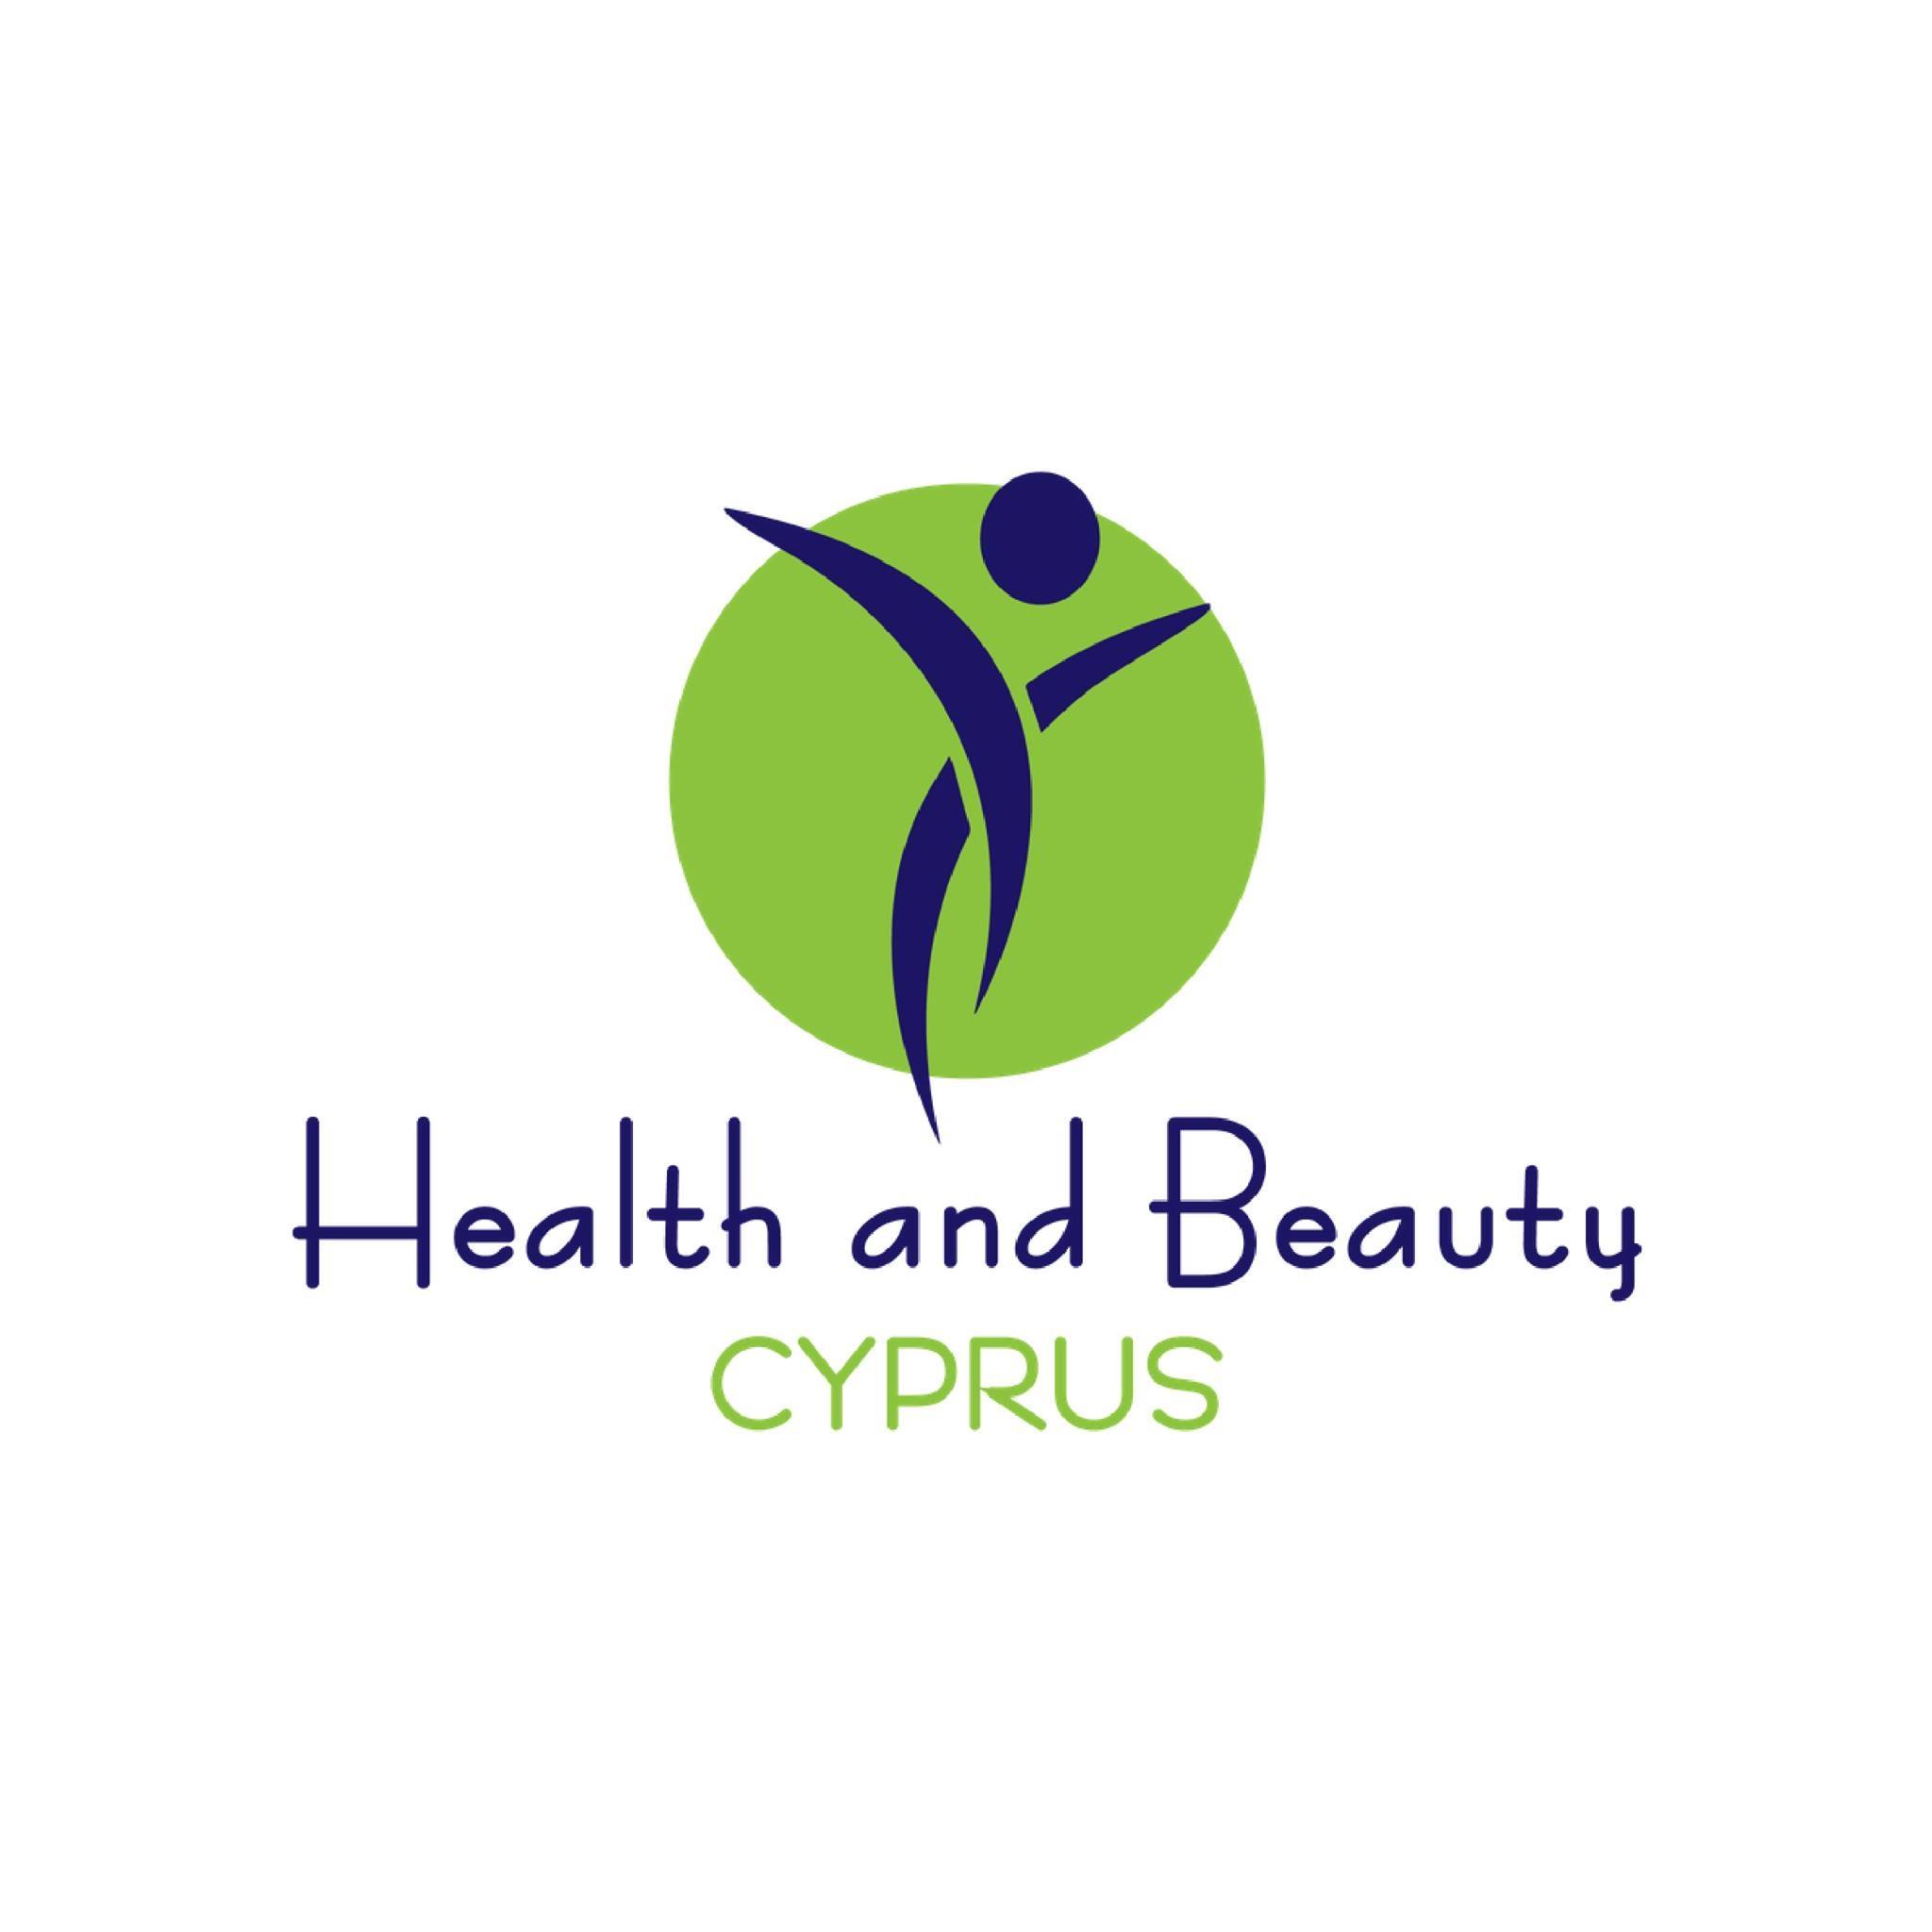 Health and Beauty Cyprus - CodeXfactor